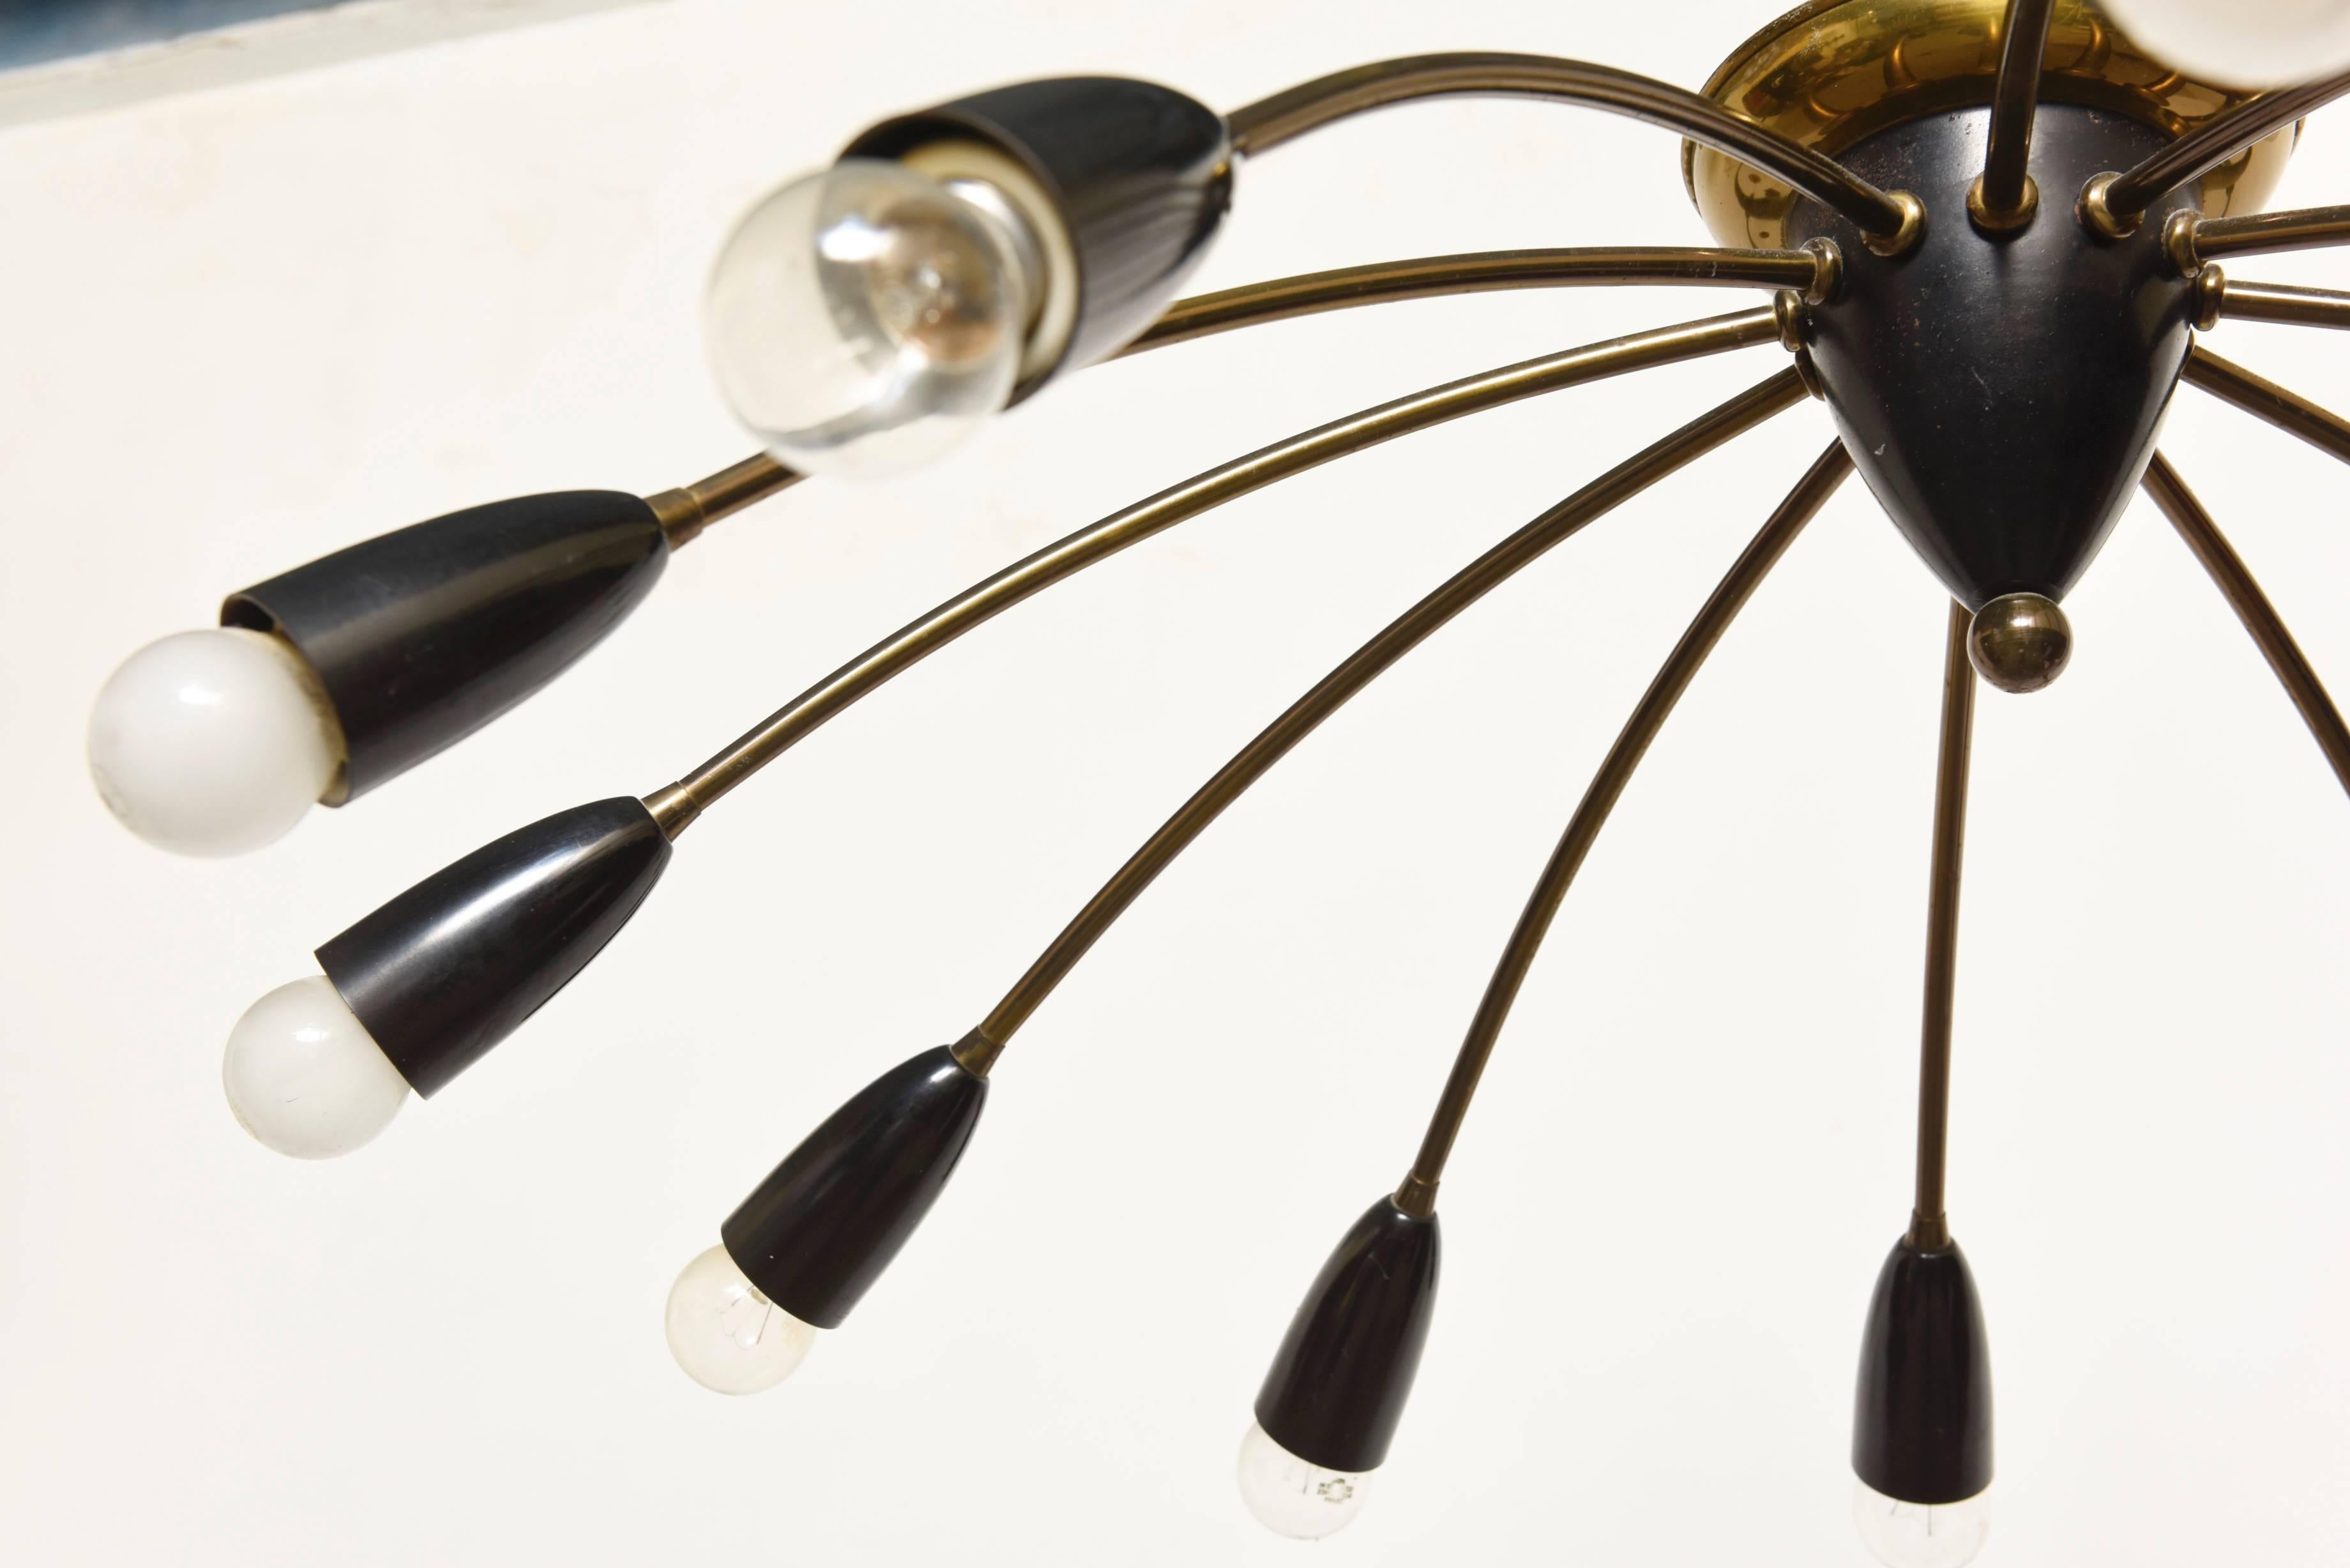 Large Sputnik chandelier, produced in Italy, circa 1950s, Stilnovo.
With 12 curved arms in brass, each terminating with a rounded socket cover in black enamel.
Wiring and sockets to US standard.
Very good condition.